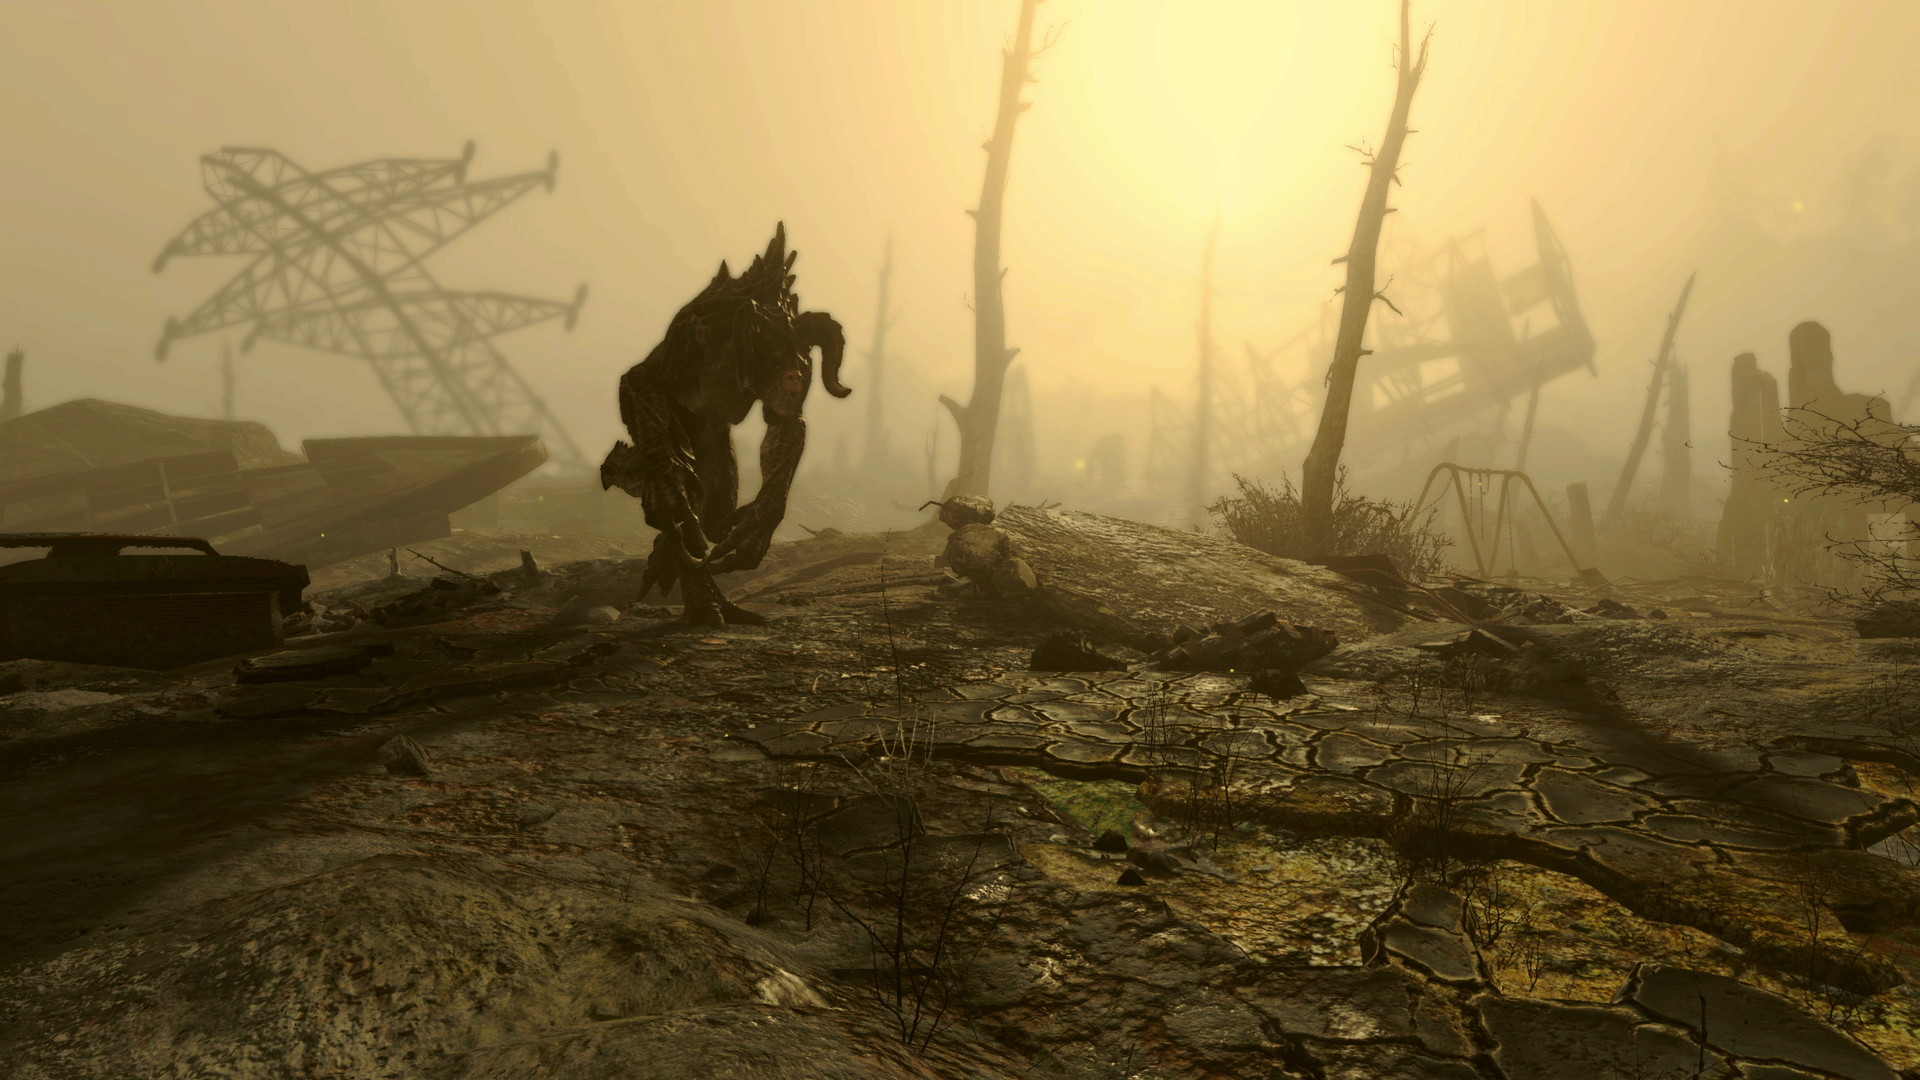 Fallout 4 realism mod: A monstrous creature, the Deathclaw from Bethesda RPG game Fallout 4